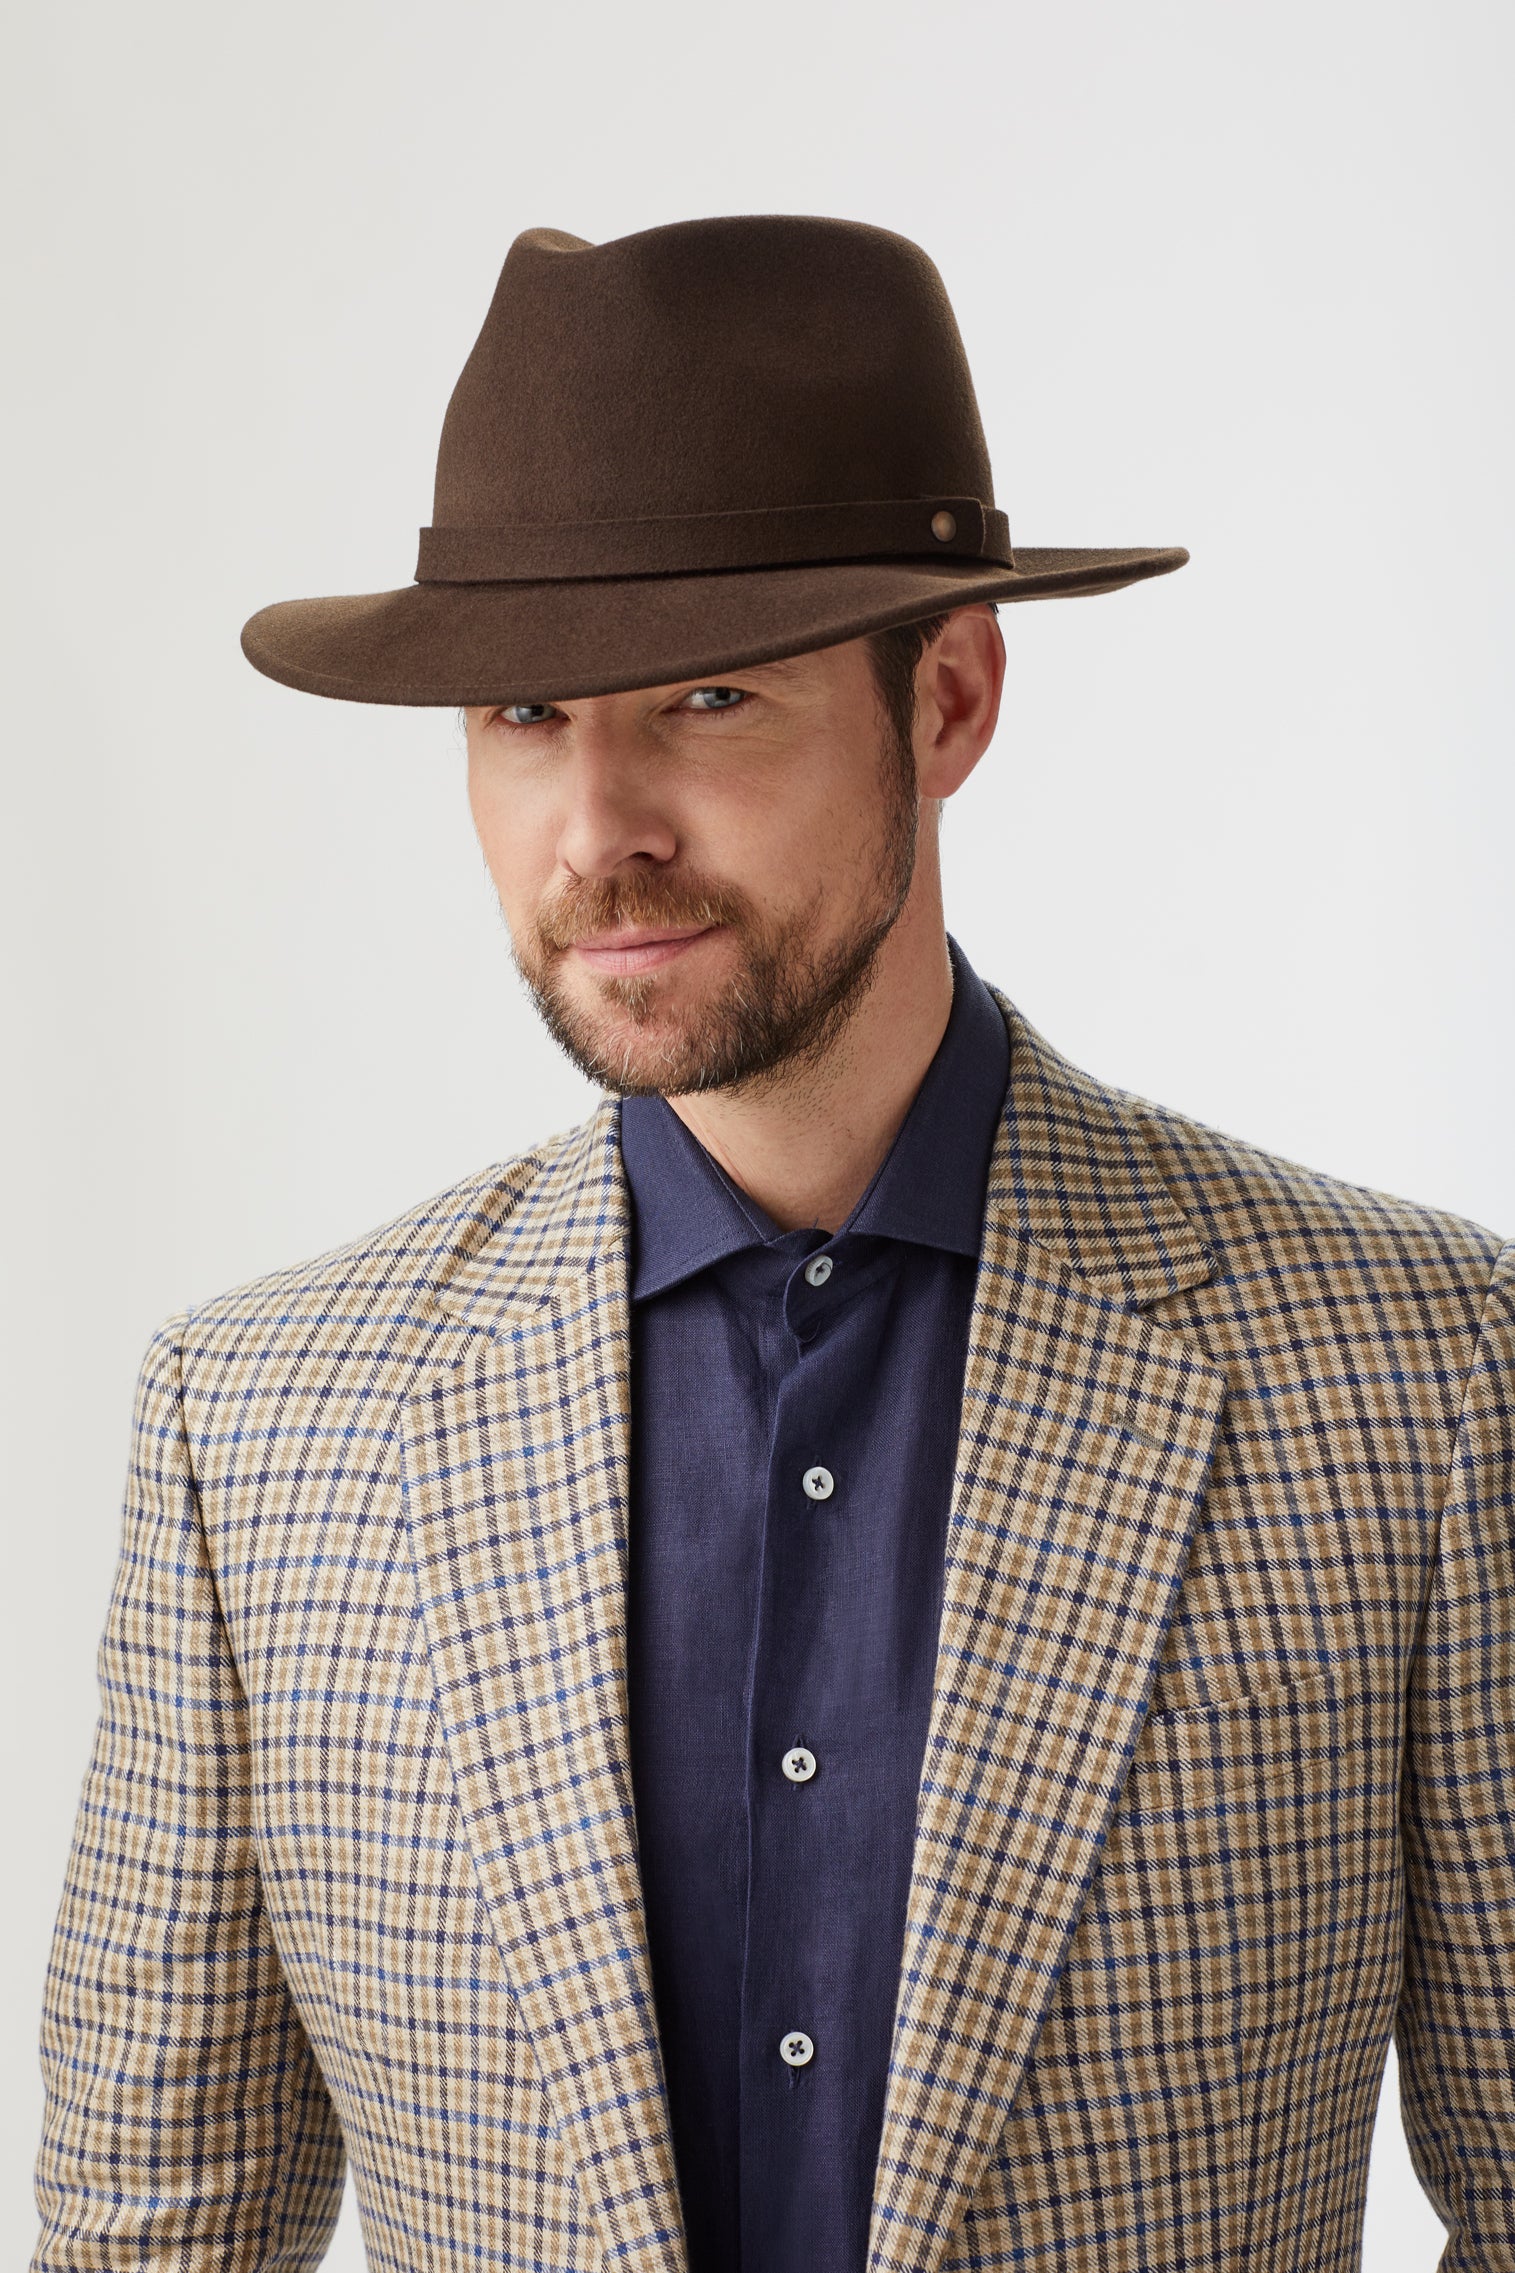 Nomad Rollable Trilby - Father's Day Gift Guide - Lock & Co. Hatters London UK